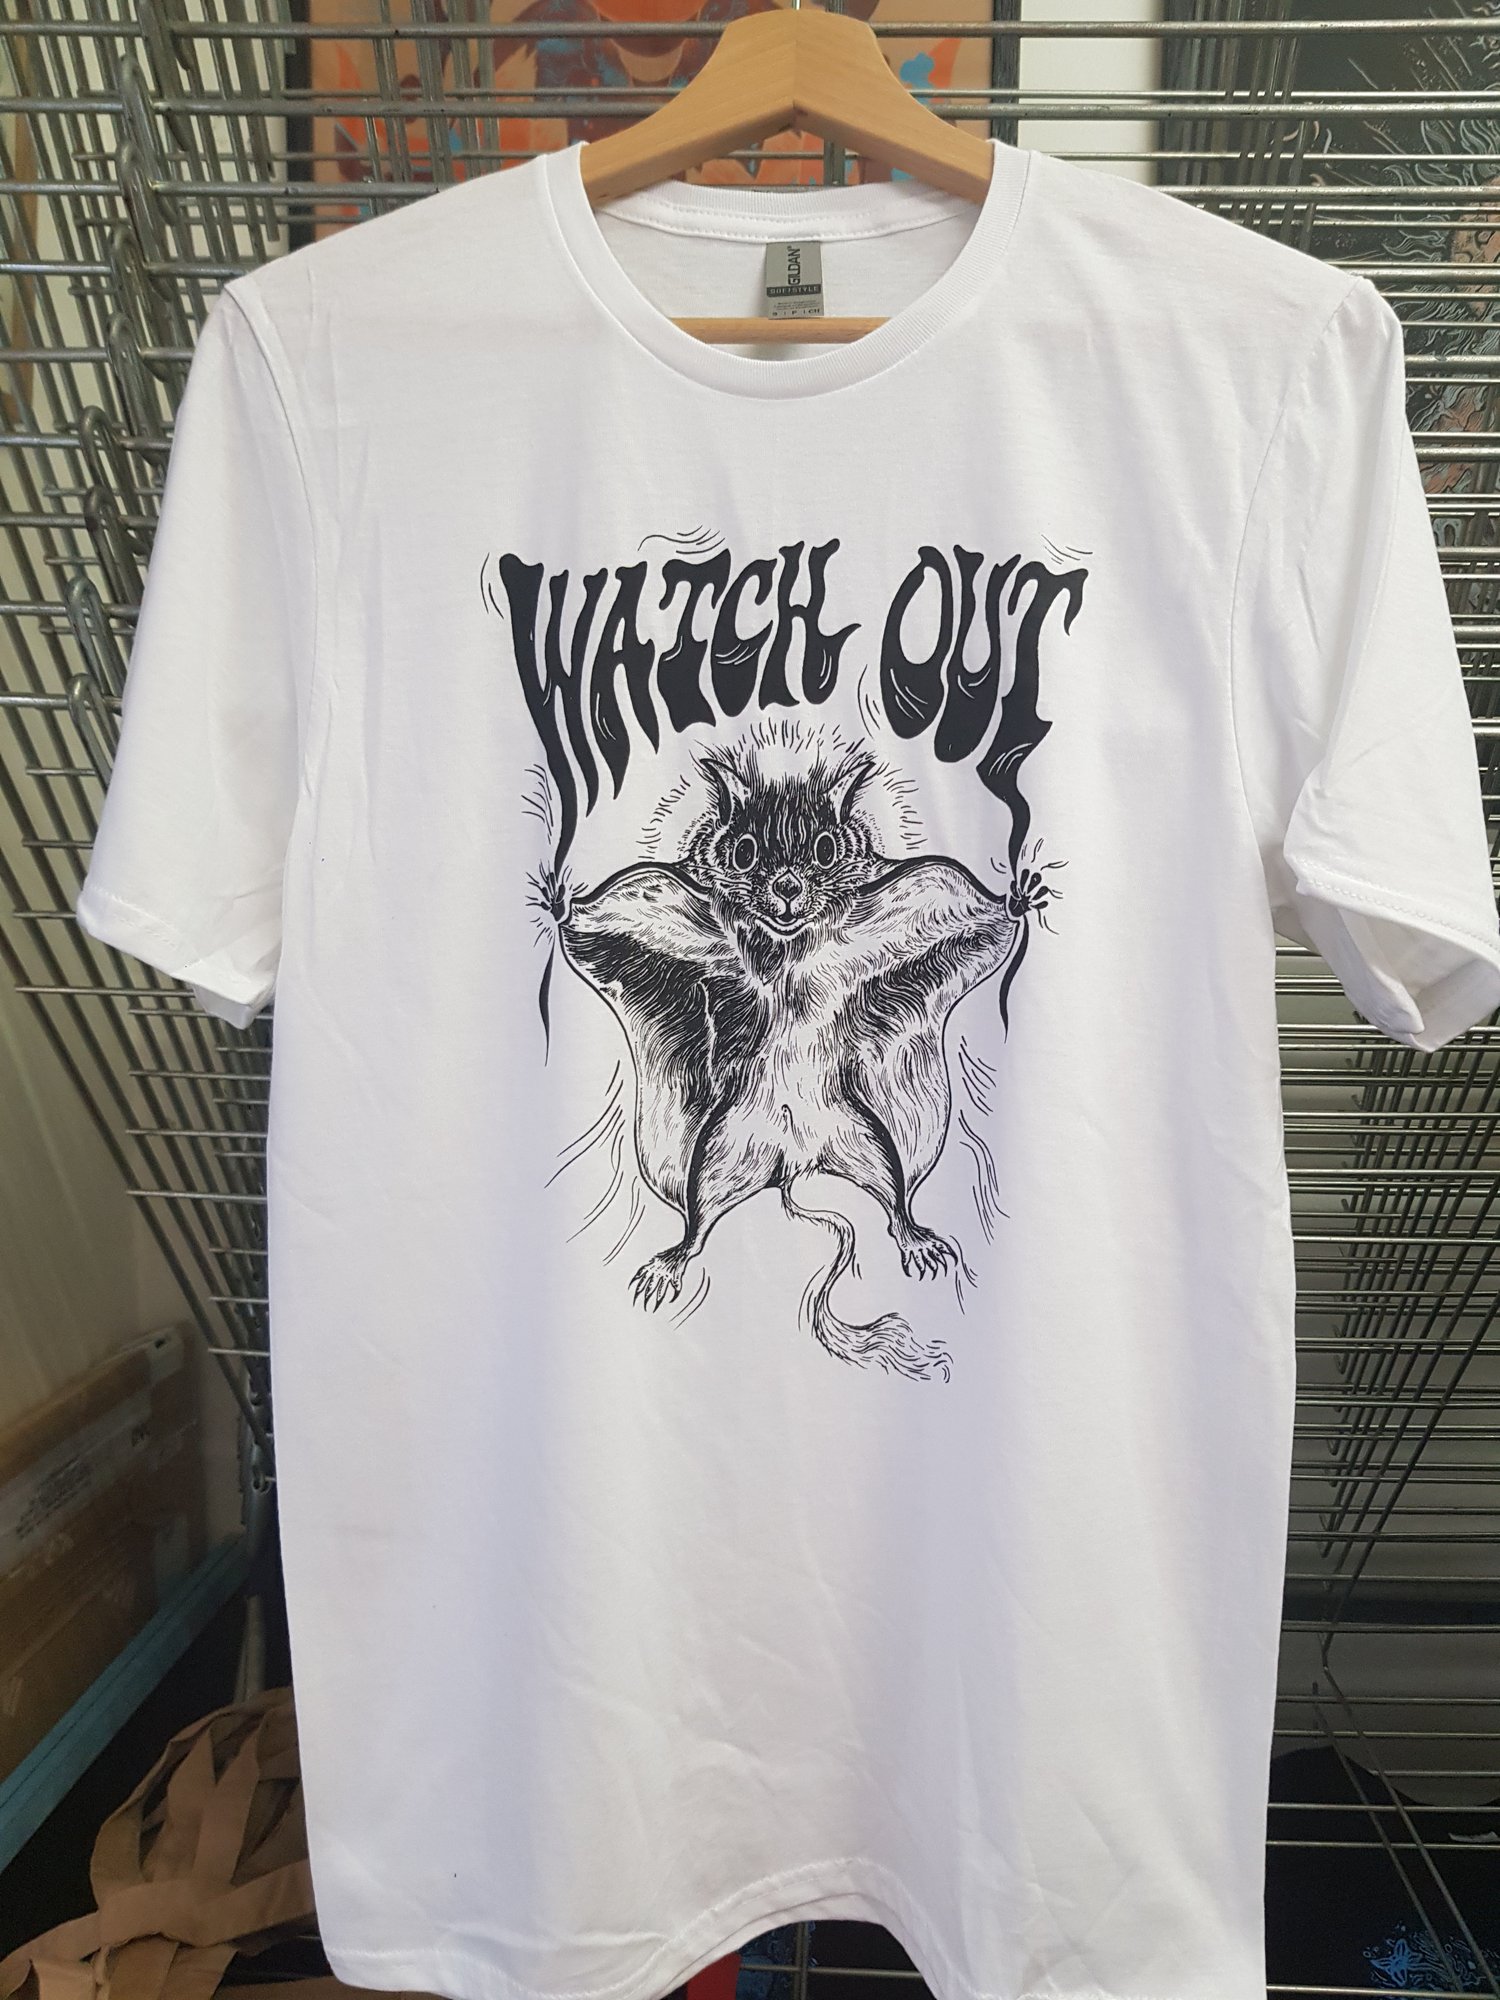 T-SHIRT "WATCH OUT"